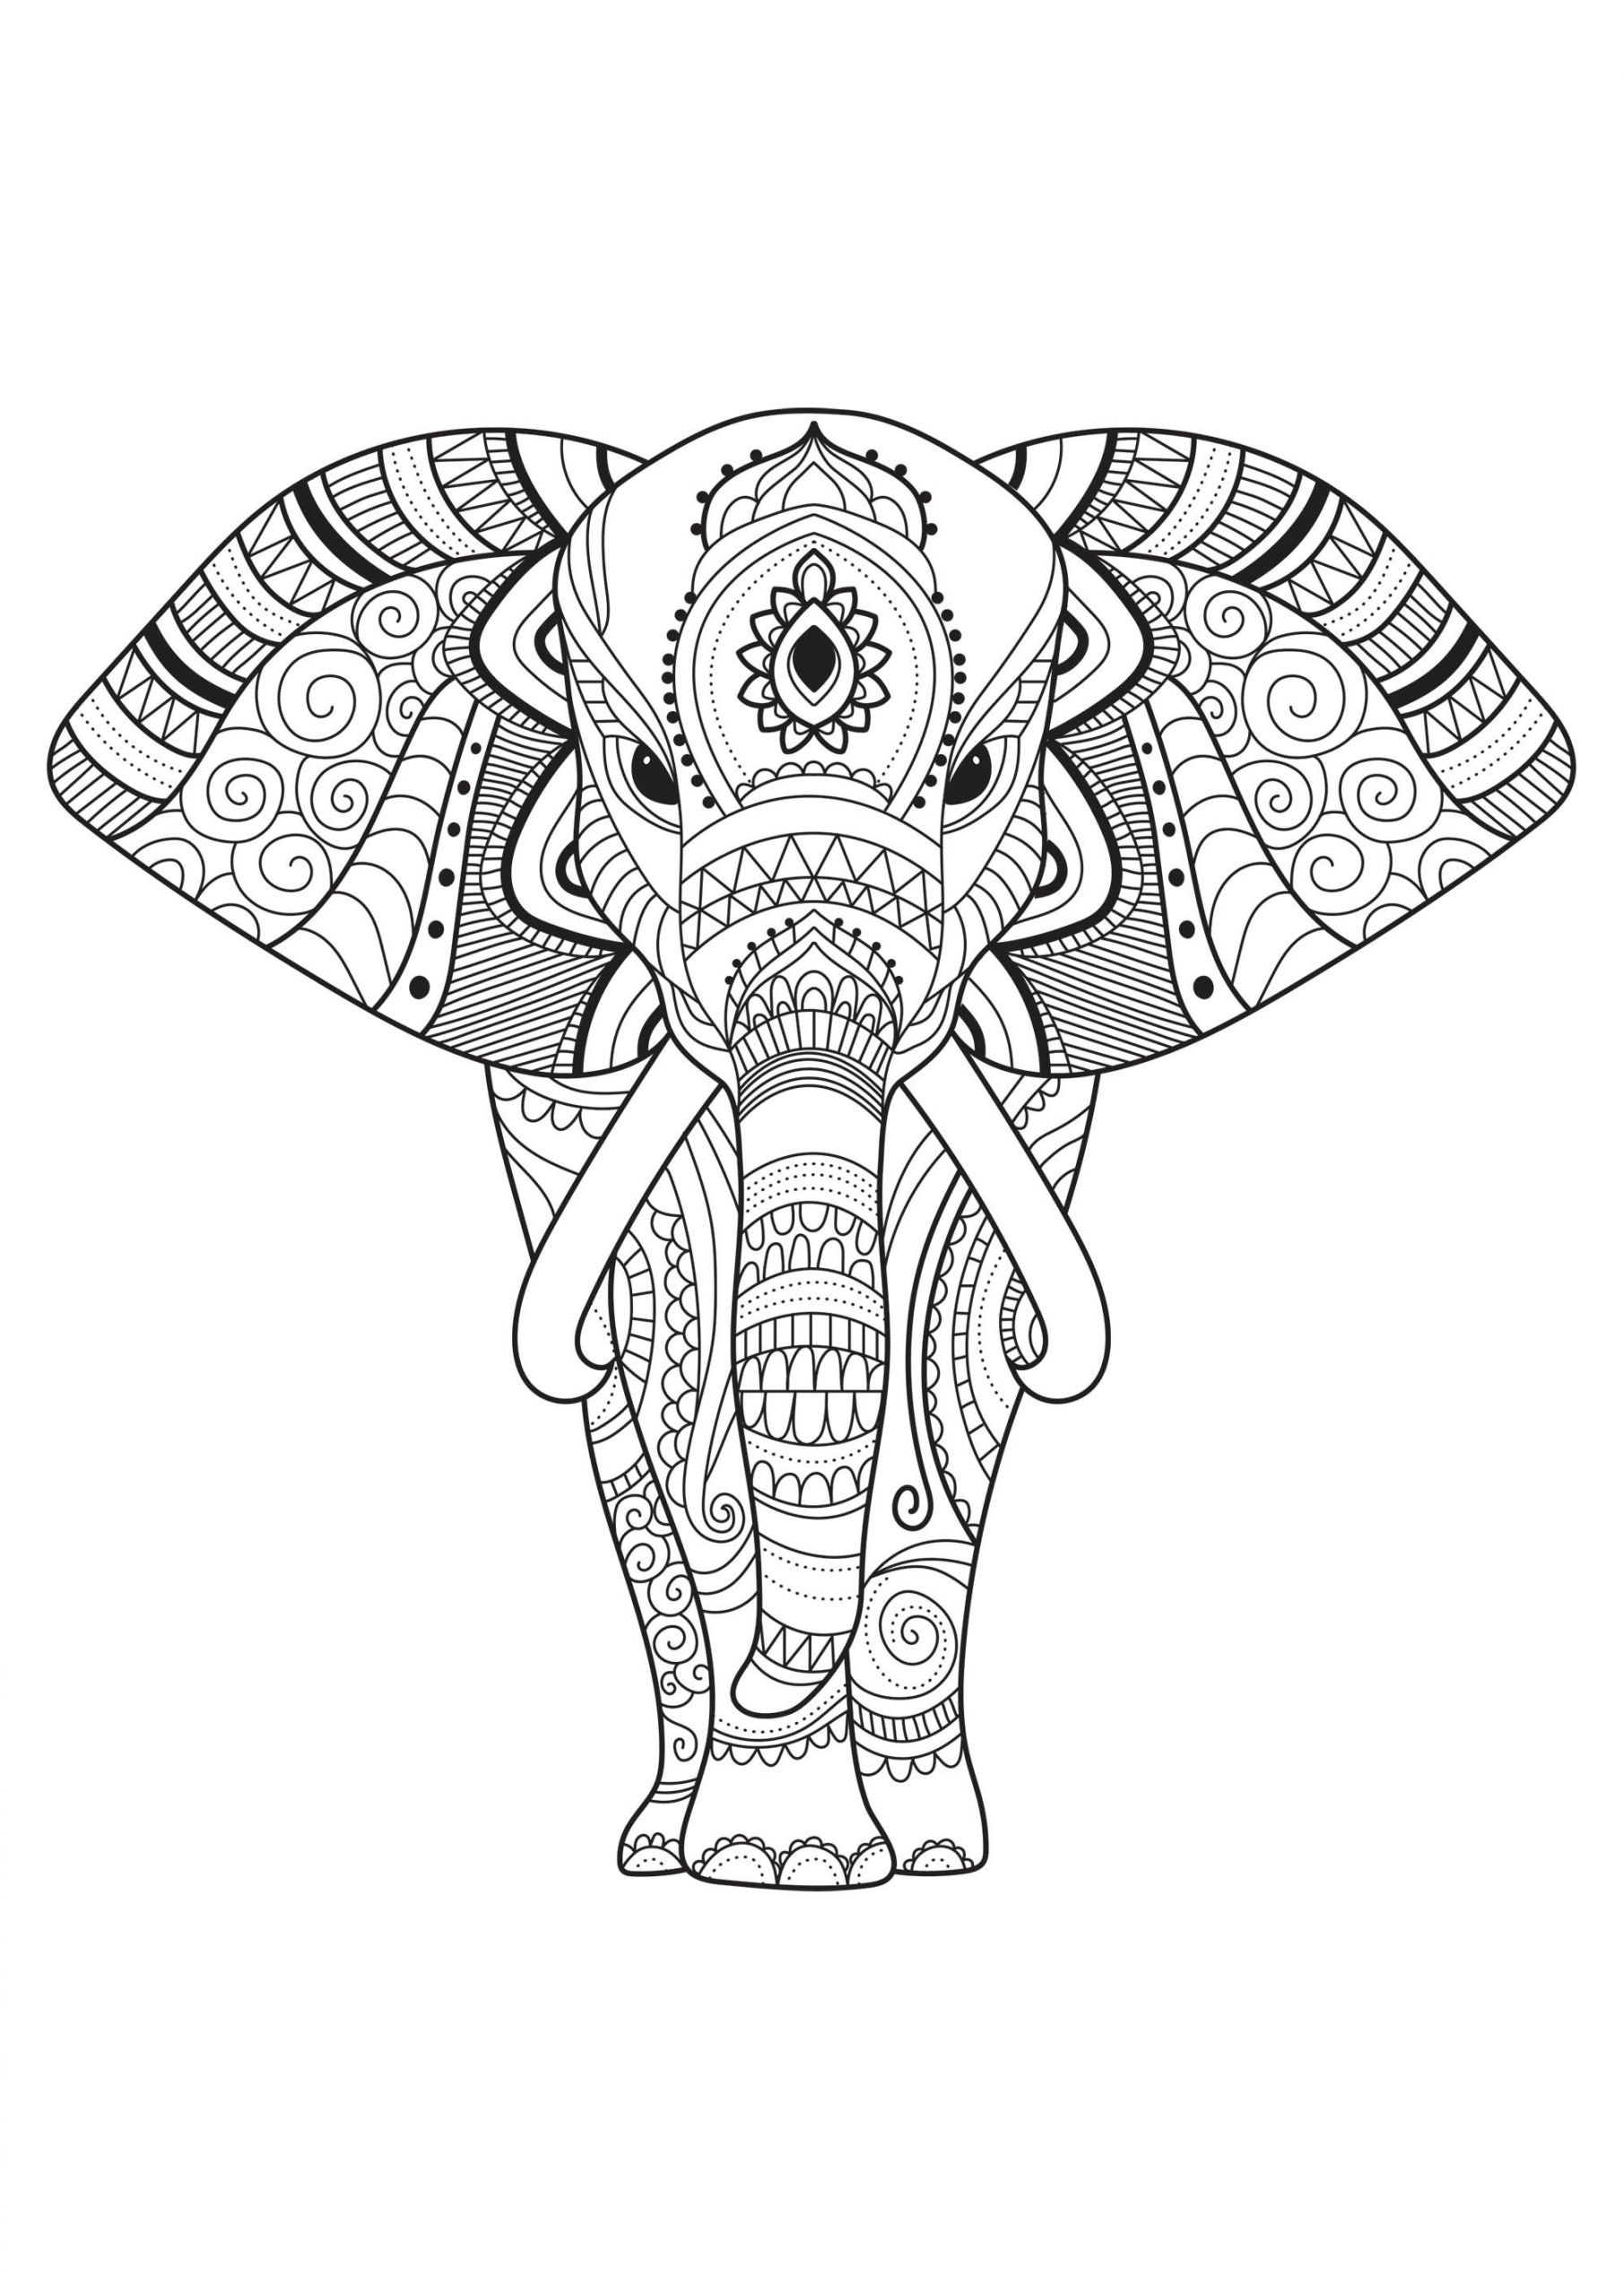 Elephant Adult Coloring Pages
 Elephant with simple patterns Elephants Adult Coloring Pages